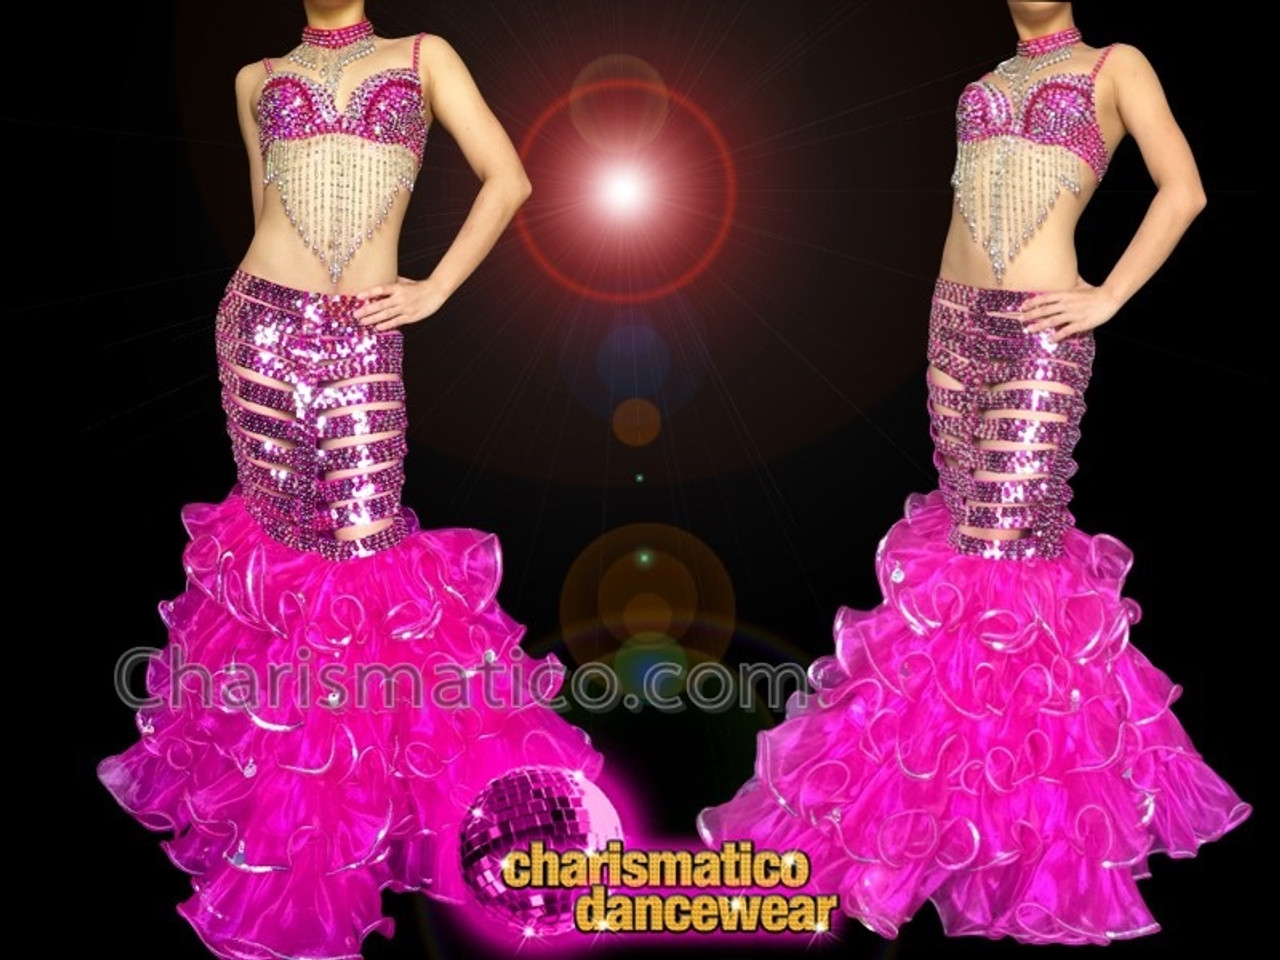 Mermaid LED Sexy Costume, Rave bra, Rave Clothes, Rave Outfit